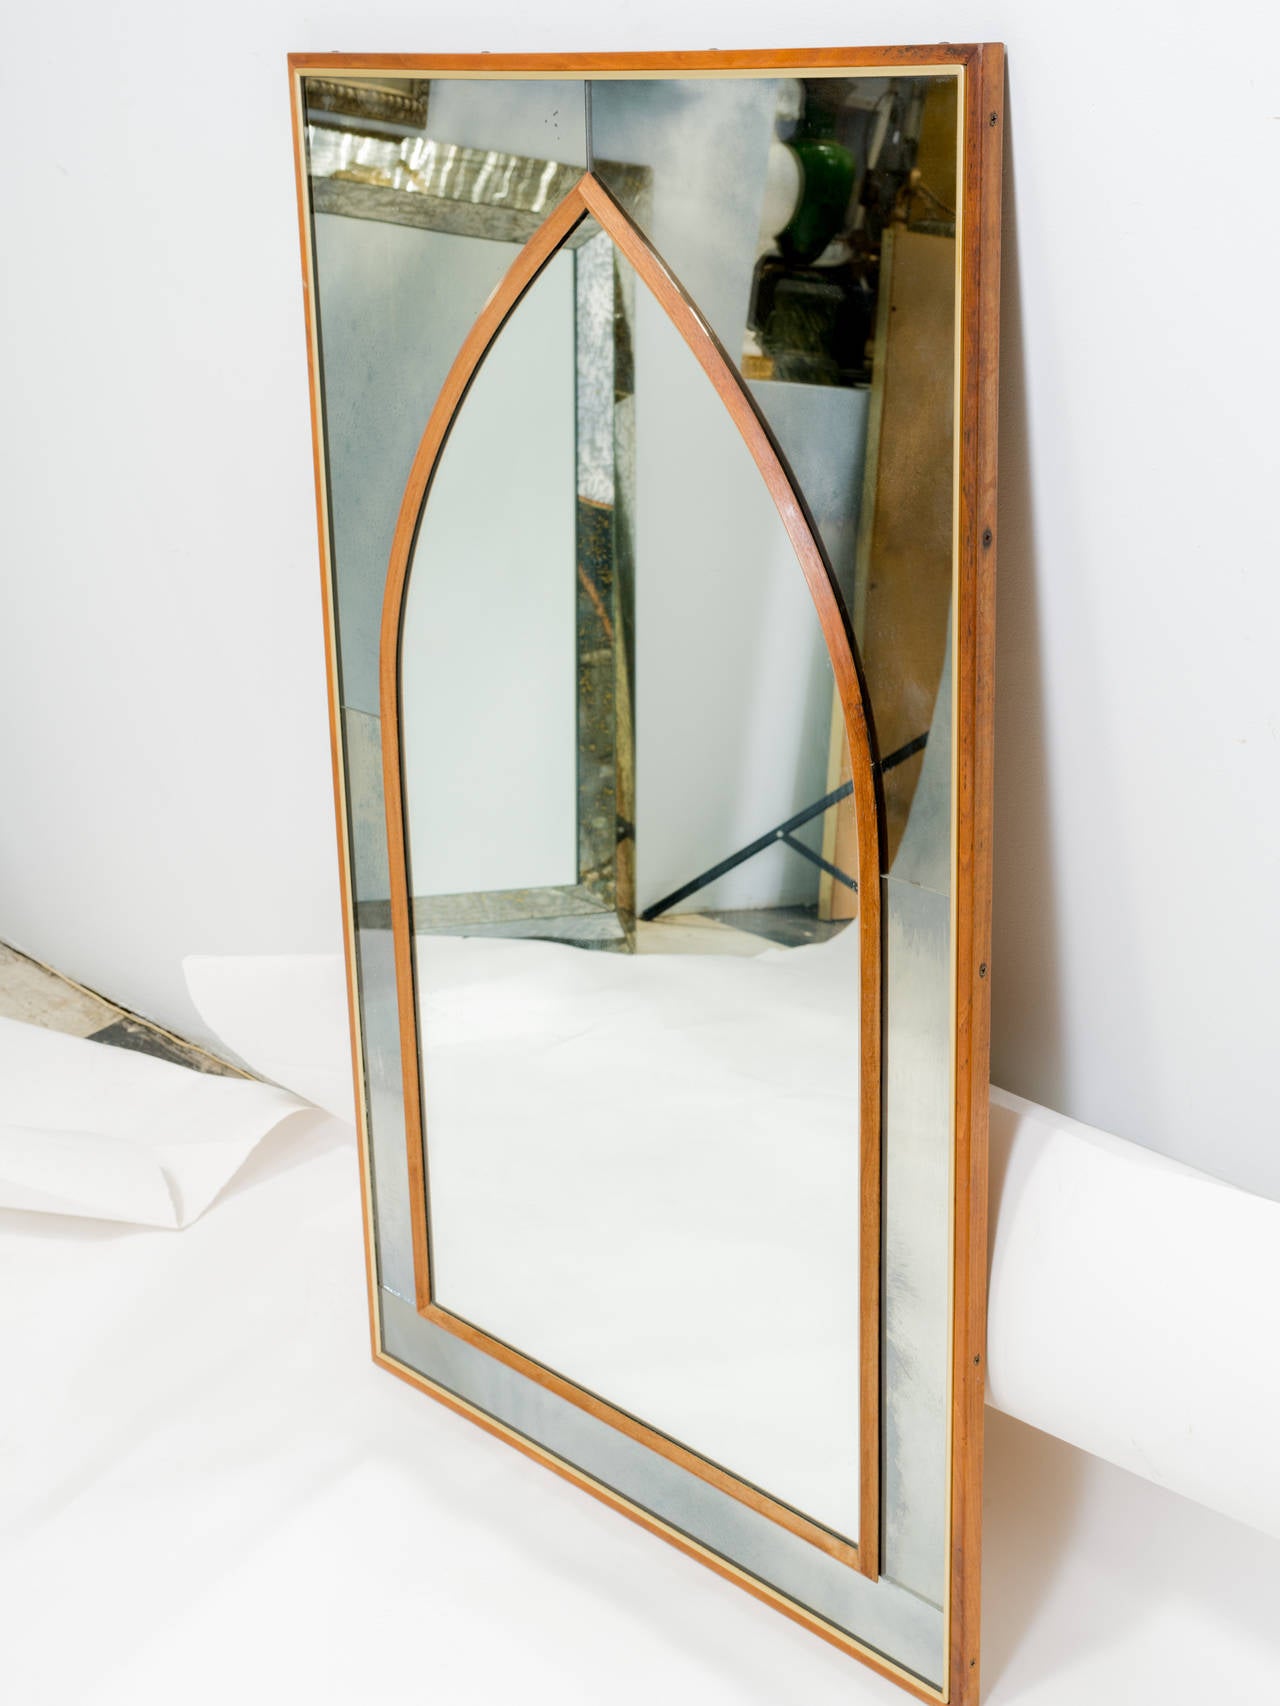 Nice wall mirror in the Moorish style. Teak framed. There is a nick in the mirror on the bottom right. The pictures do not show this, If interested, we will send a picture.